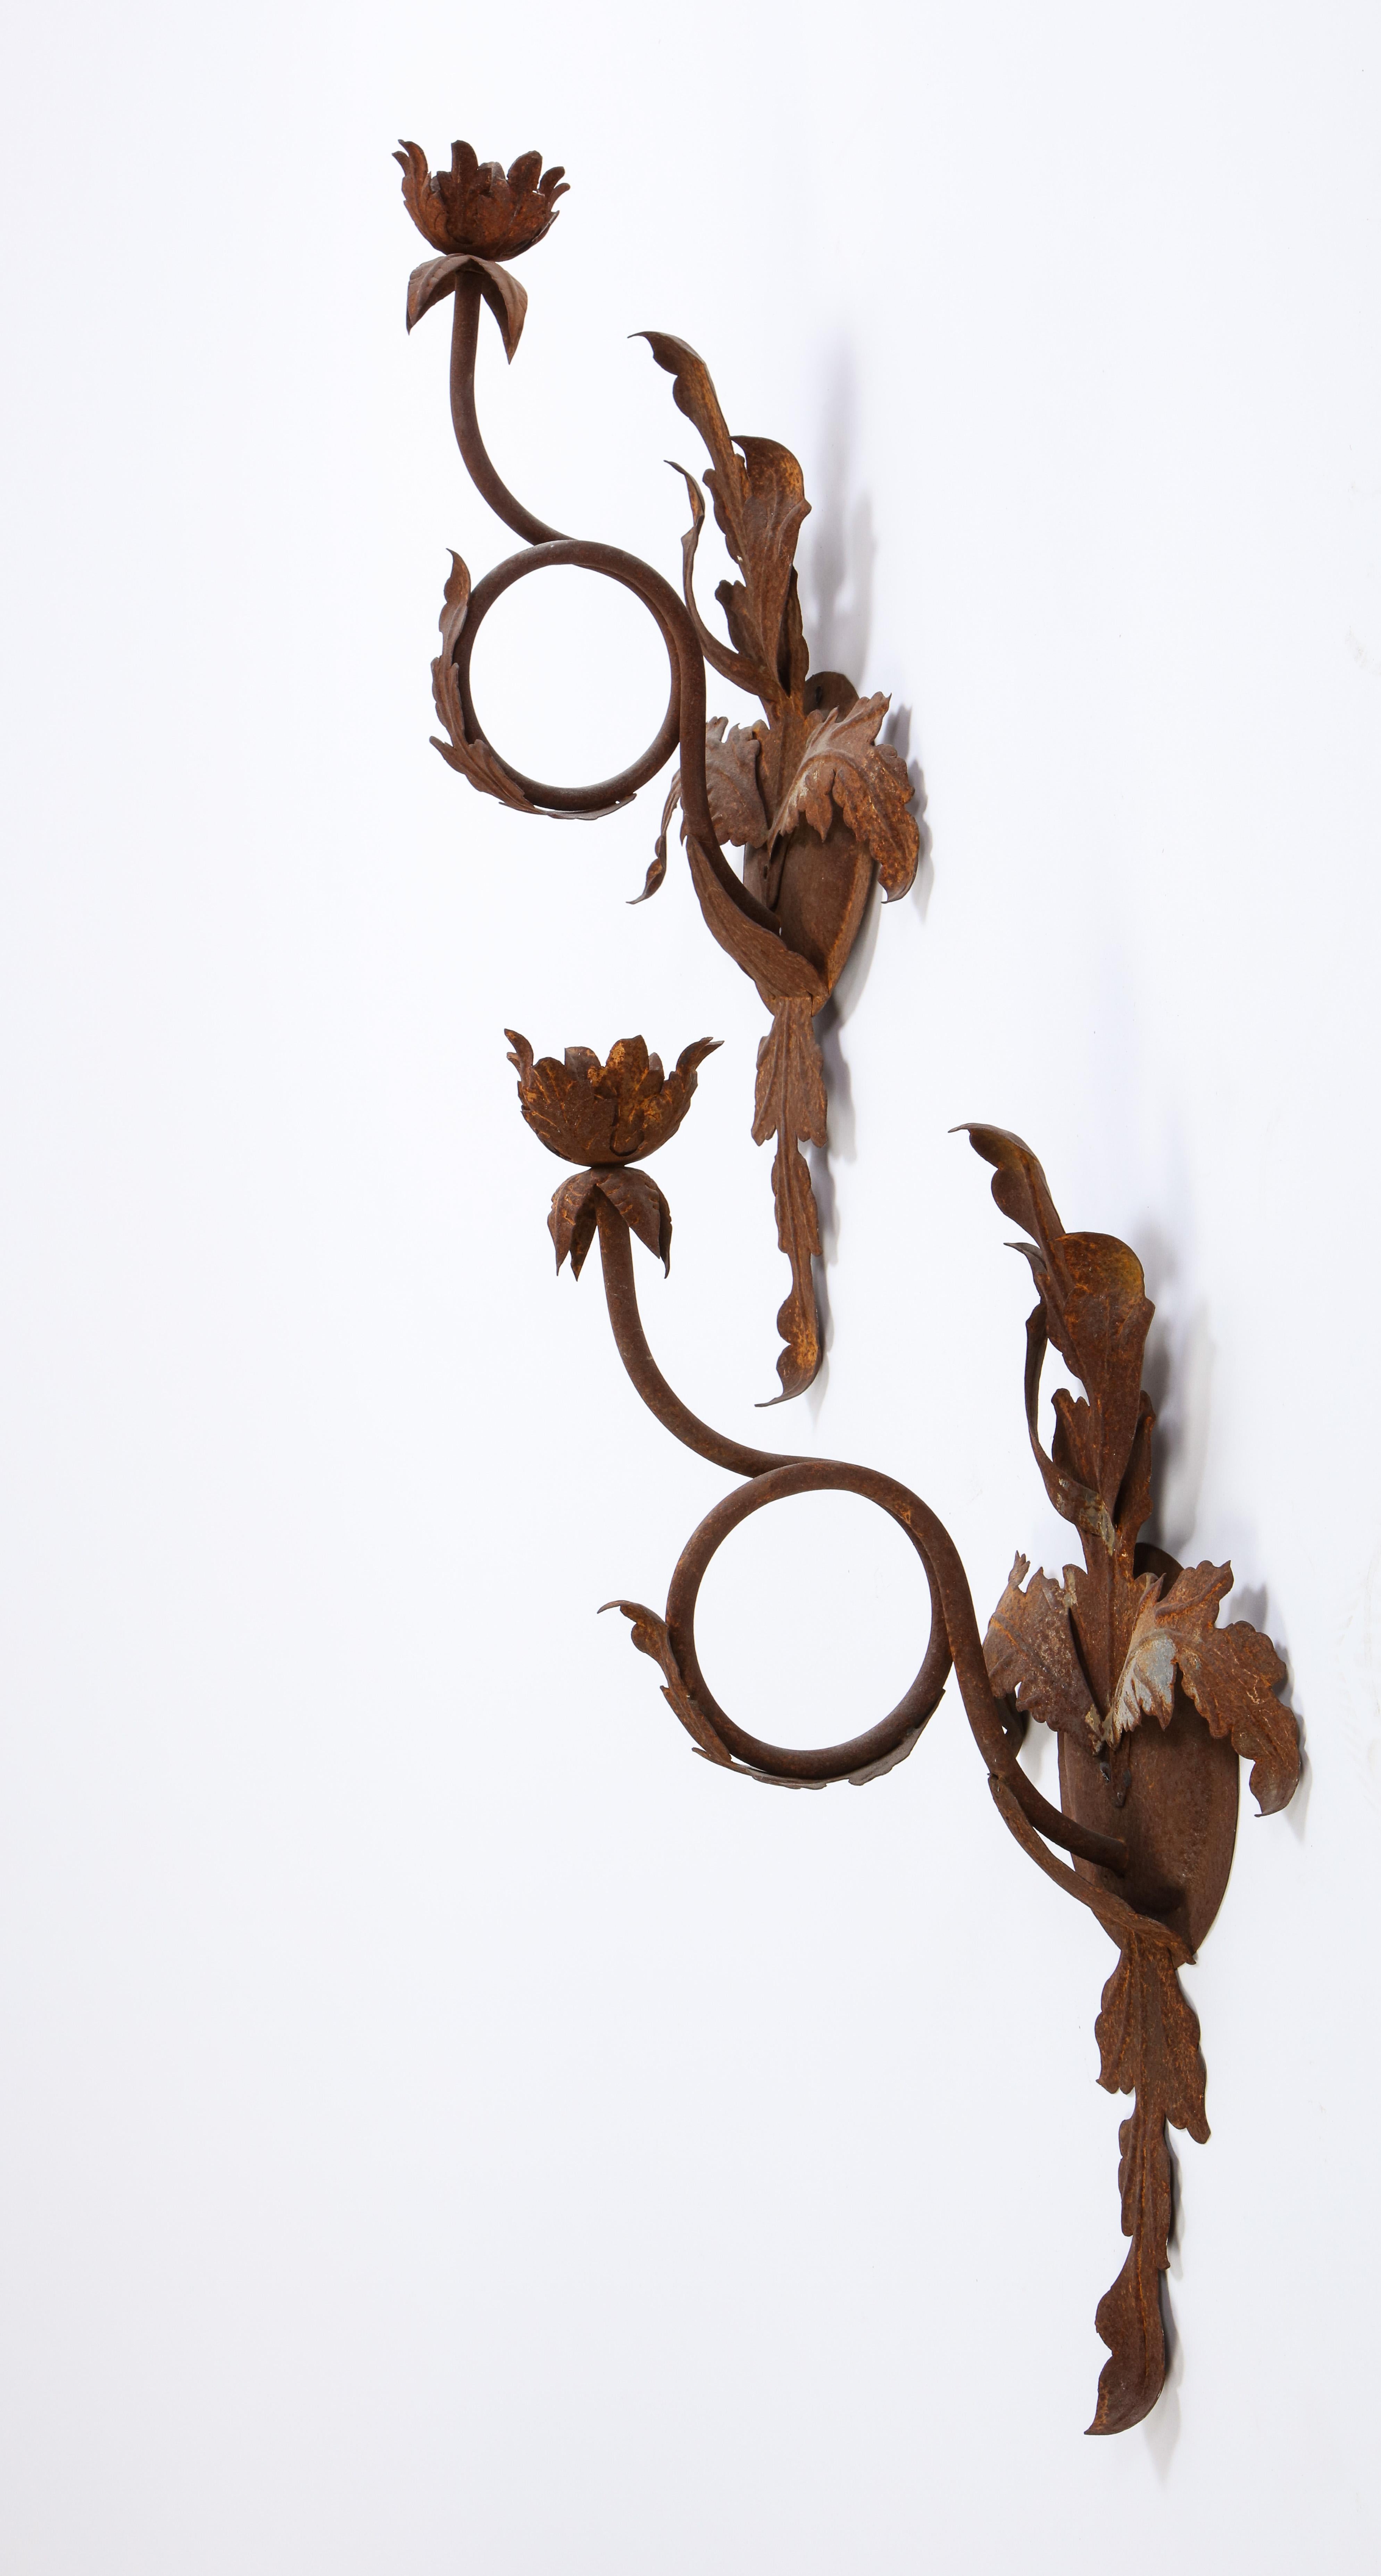 A pair of 20th century wrought-iron wall lights or sconces with rust patina and floral motif. Each sconce is formed as a budding flower with leaf-form pendants.

Property from esteemed interior designer Juan Montoya. Juan Montoya is one of the most